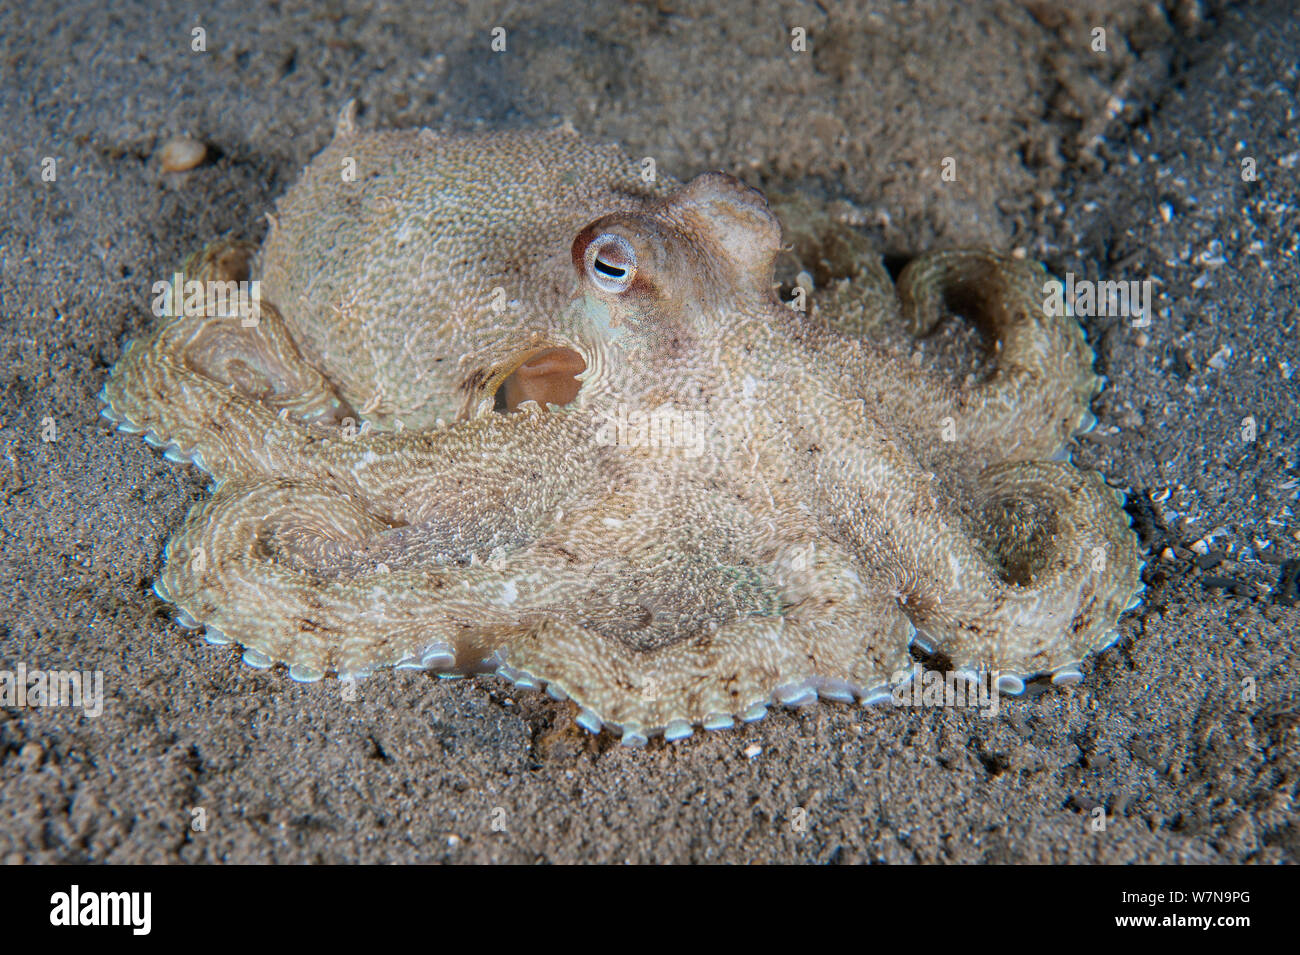 Southern keeled octopus (Octopus berrima) moves across the sand at night. Port Philip Bay, Blairgowrie, Melbourne, Victoria, Australia. Stock Photo